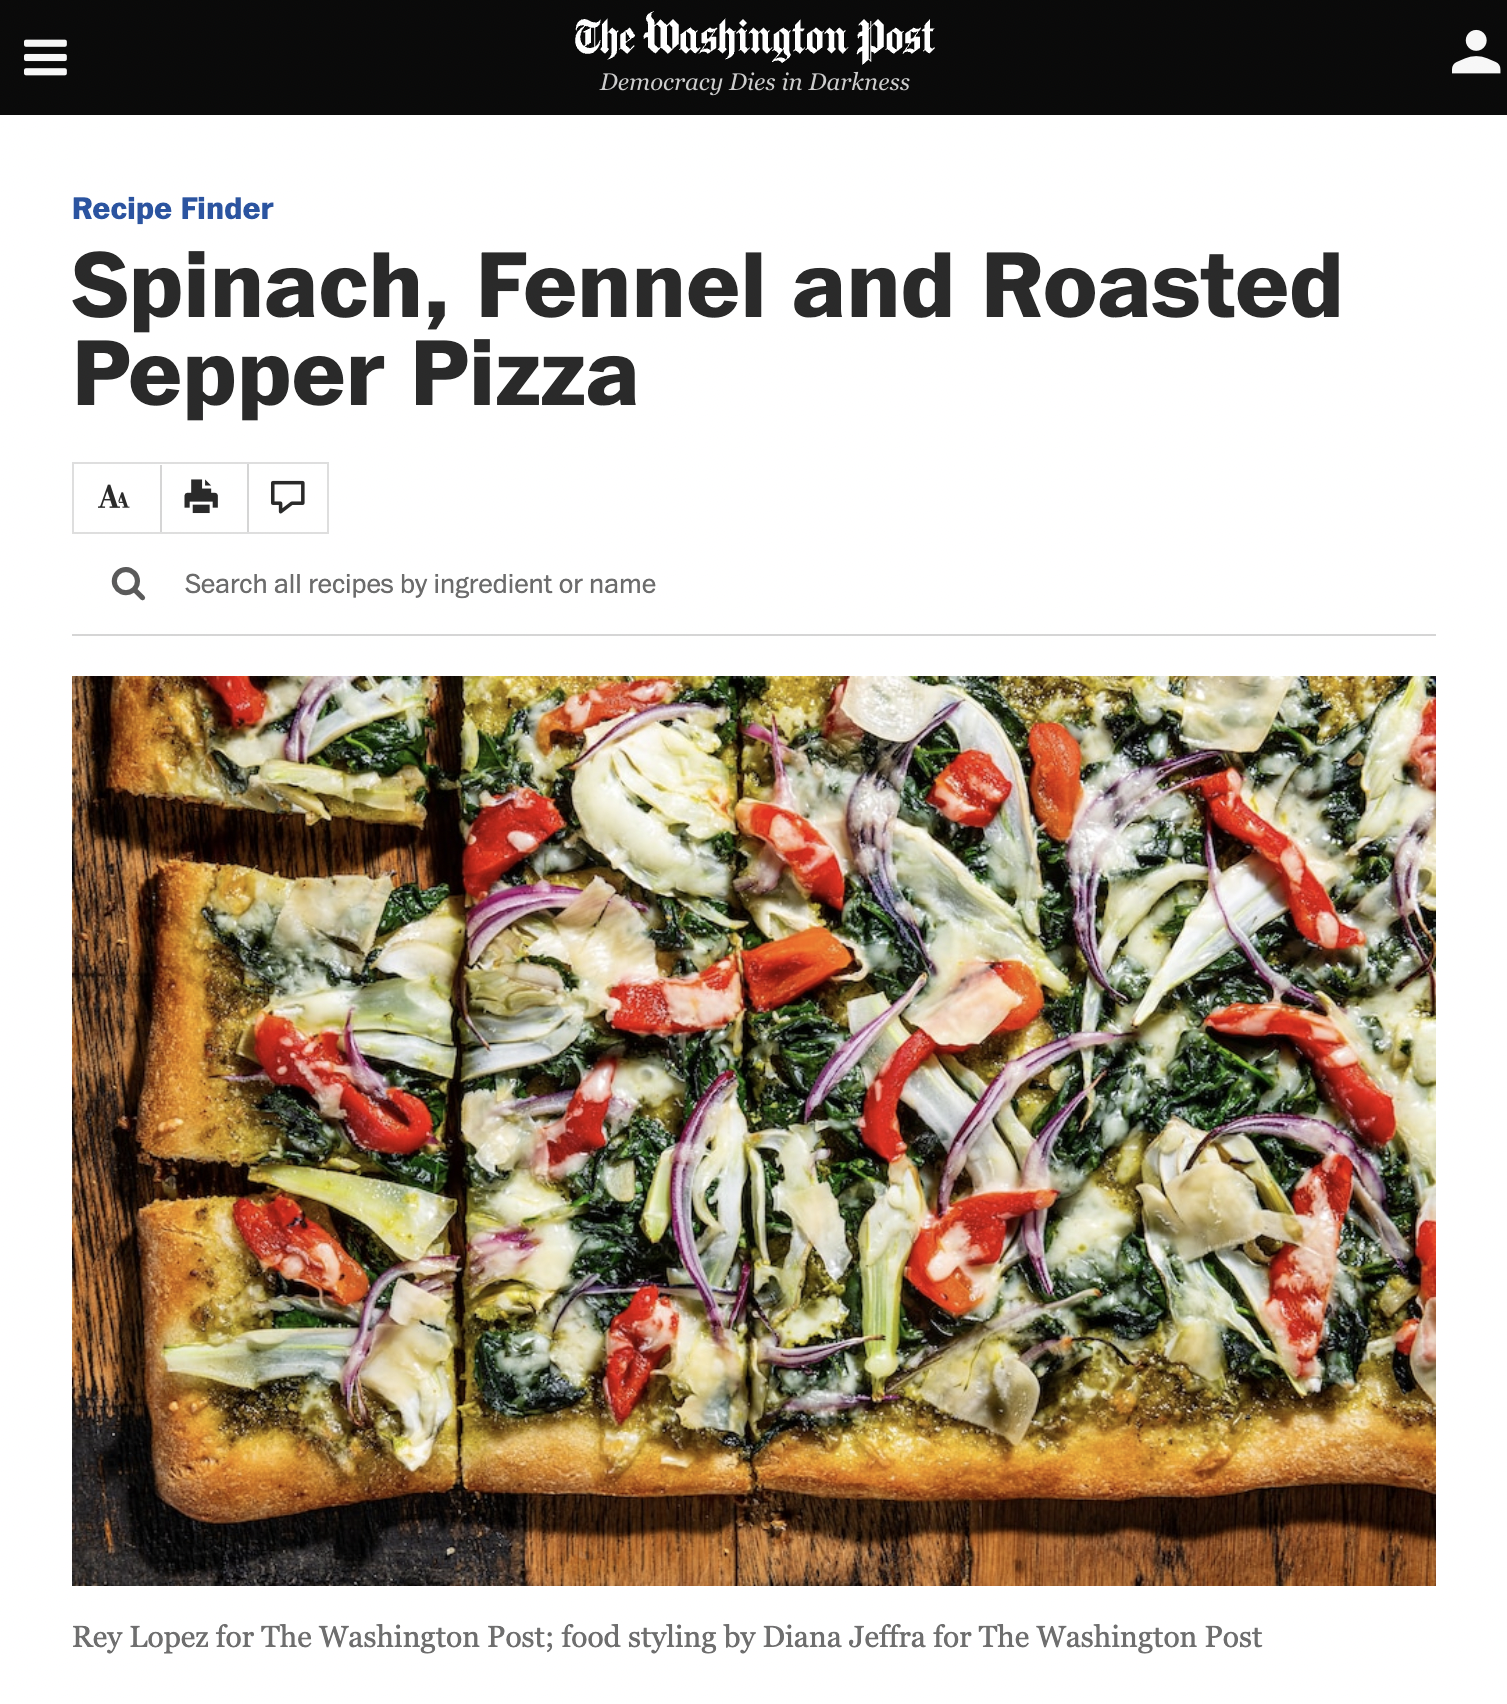 Washington Post- Spinach, Fennel, and Roasted Pepper Pizza